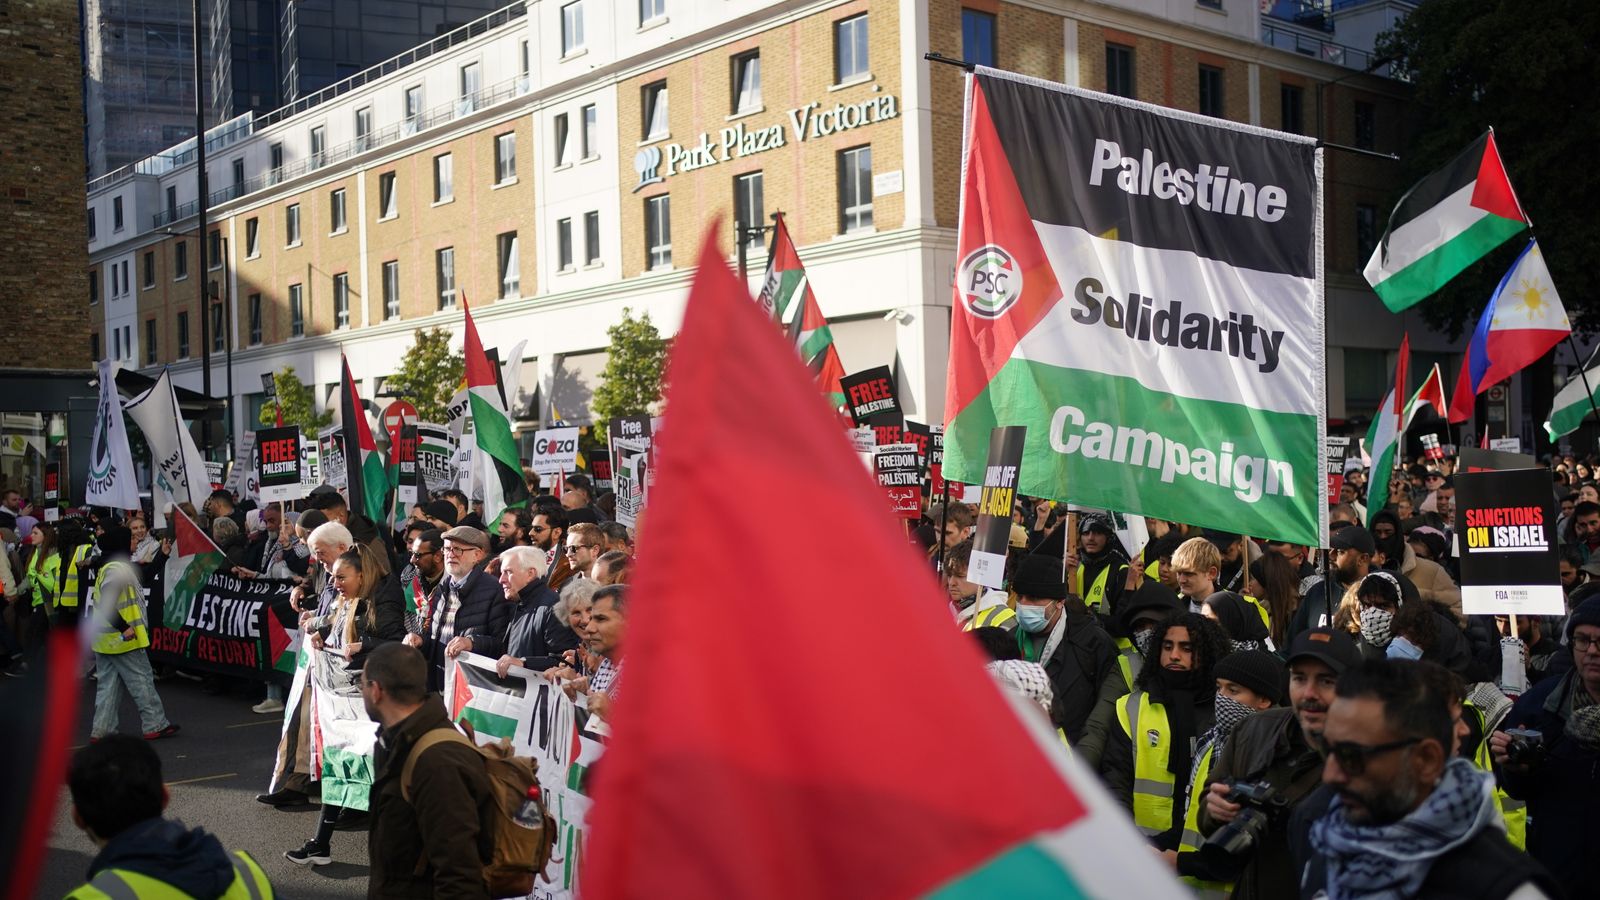 Met Police to hand pro-Palestinian protesters leaflets to provide 'absolute clarity' on potential criminal offences